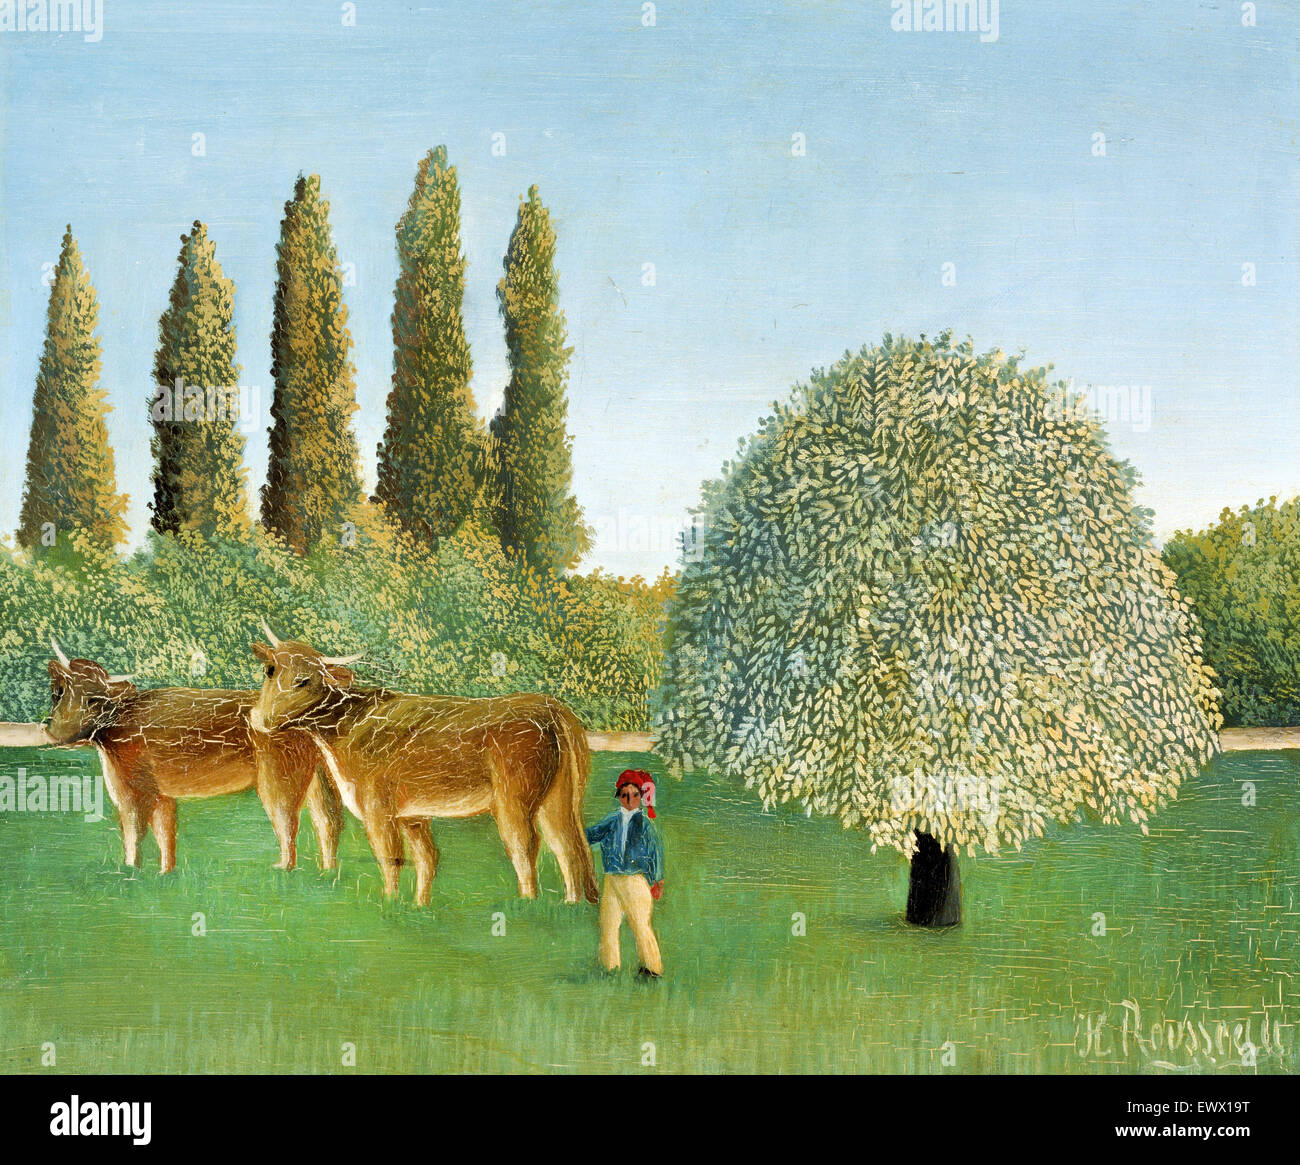 Henri Rousseau - The Repast of the Lion - Cool Cut Painting Remake